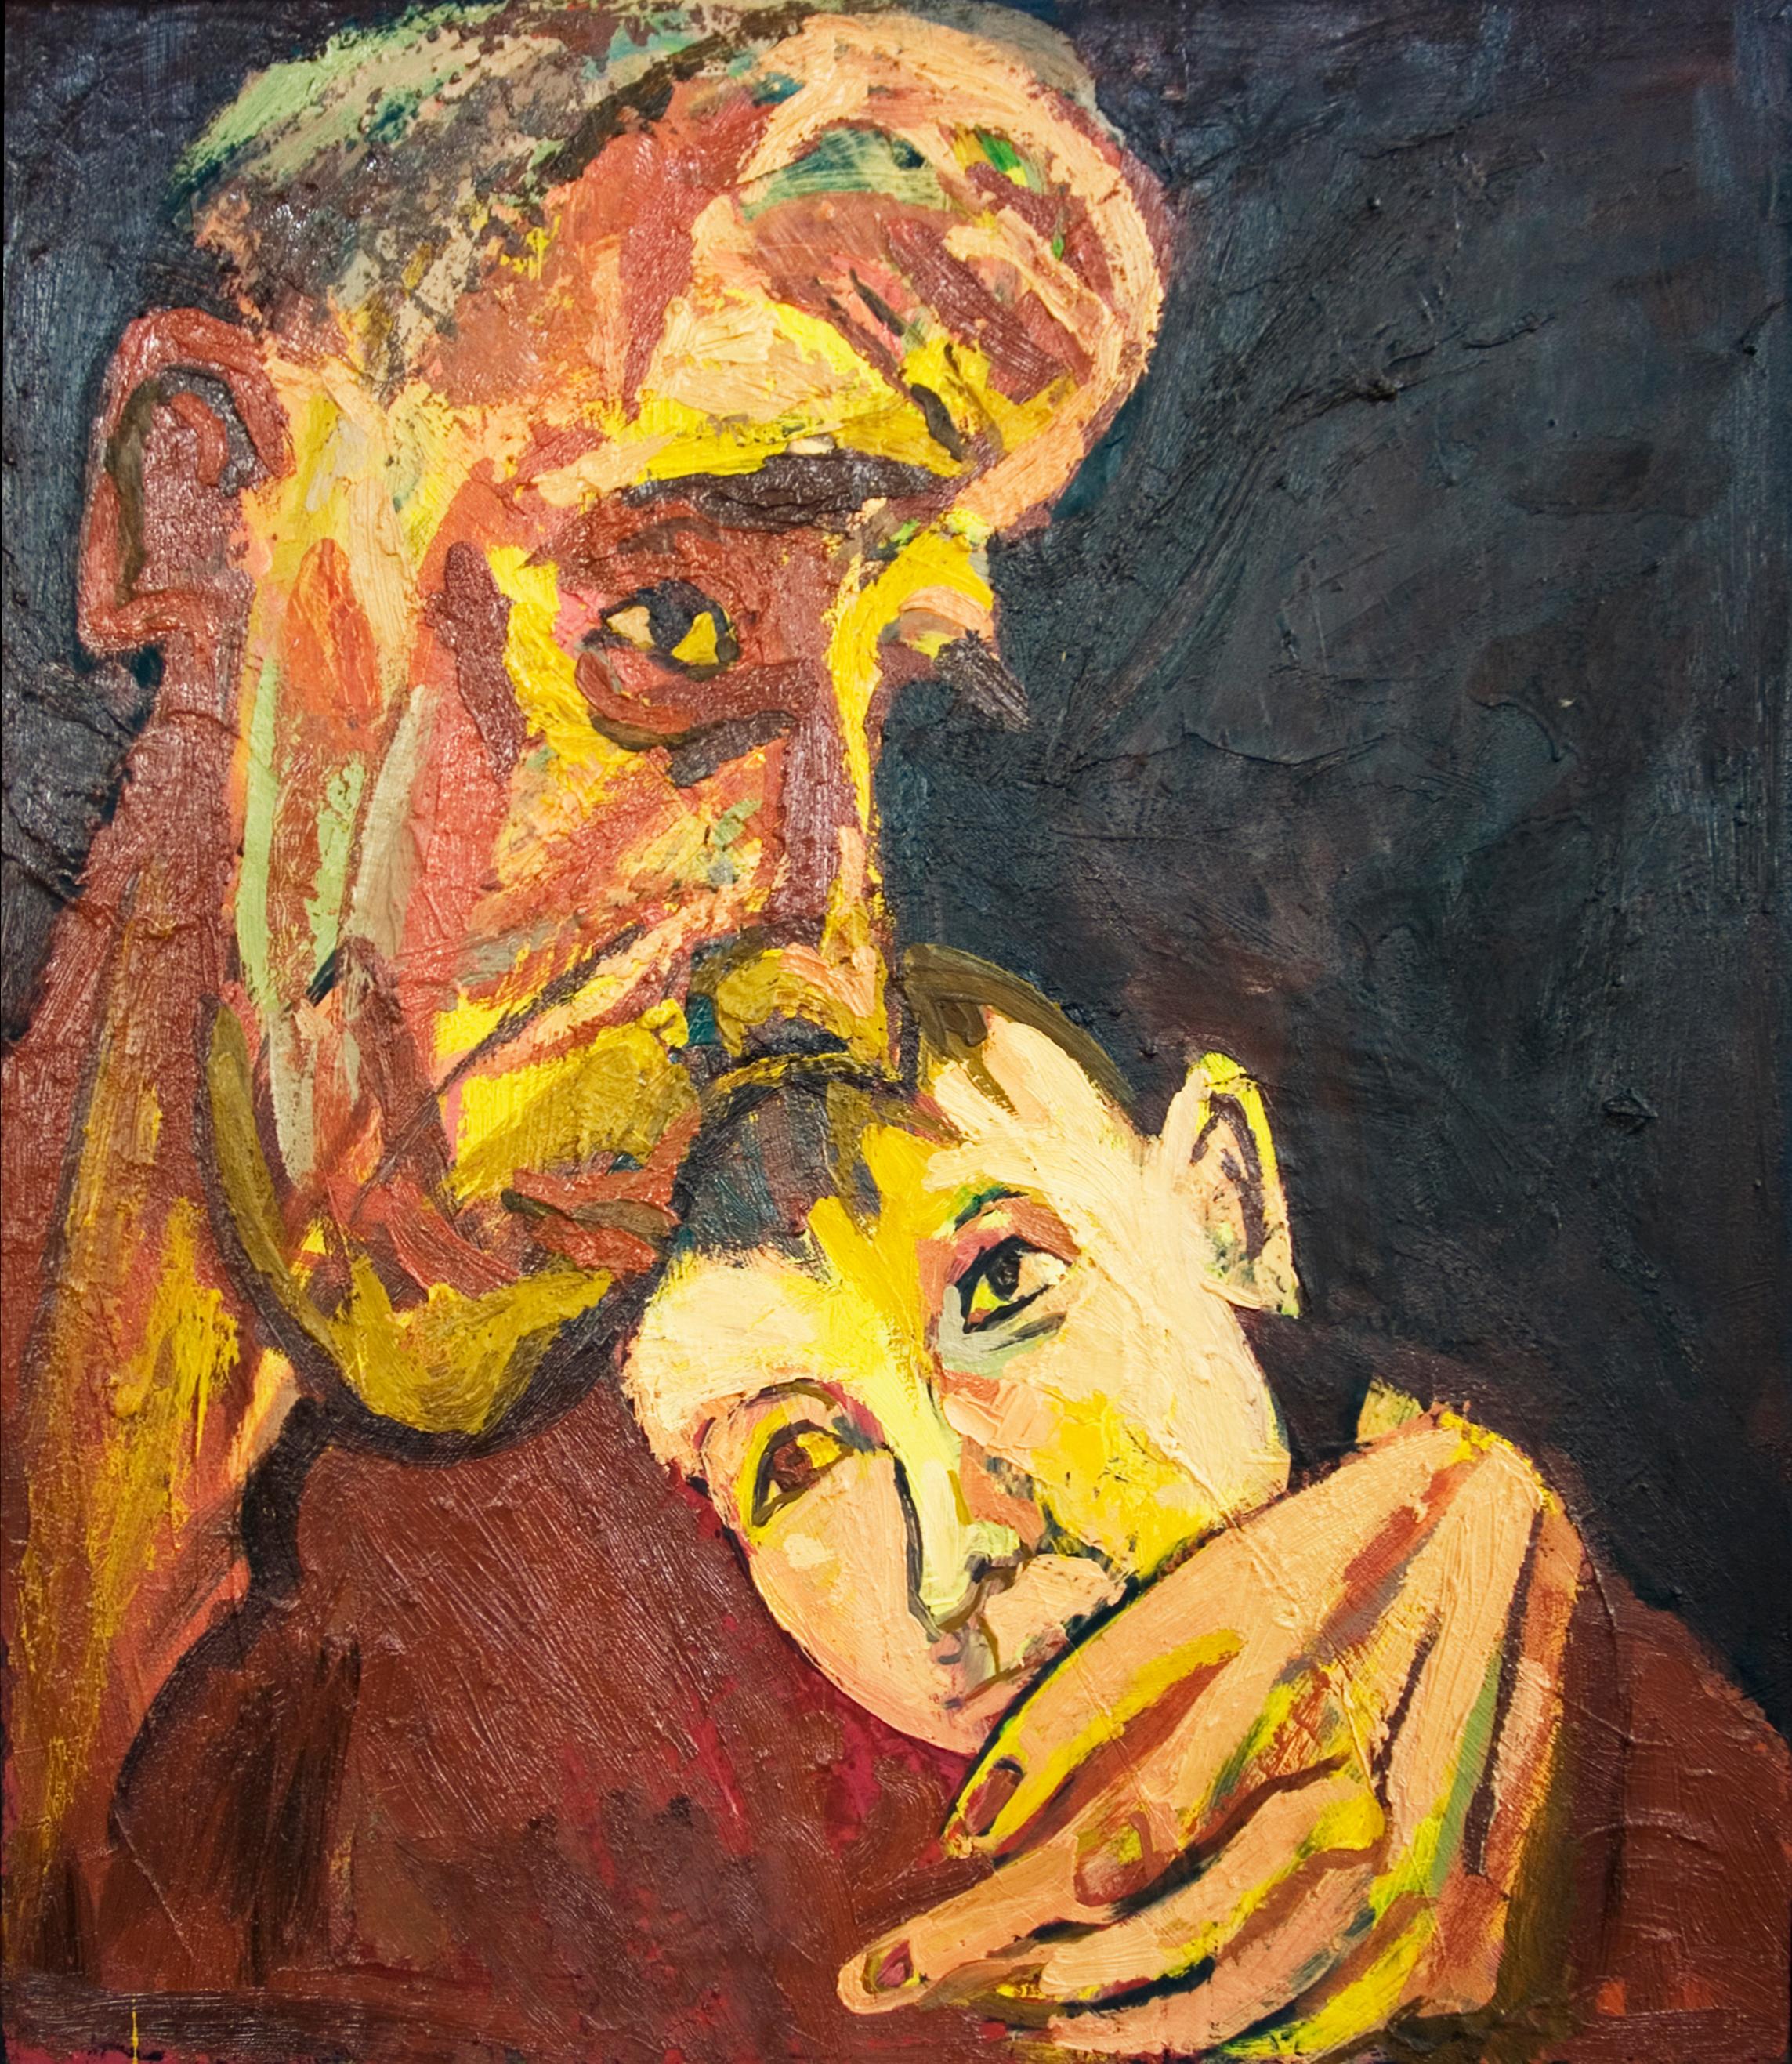 Maxim Kantor Figurative Painting - Grandfather and Grandson - Oil/Canvas, Figurative, Portrait, Neo-Expressionist